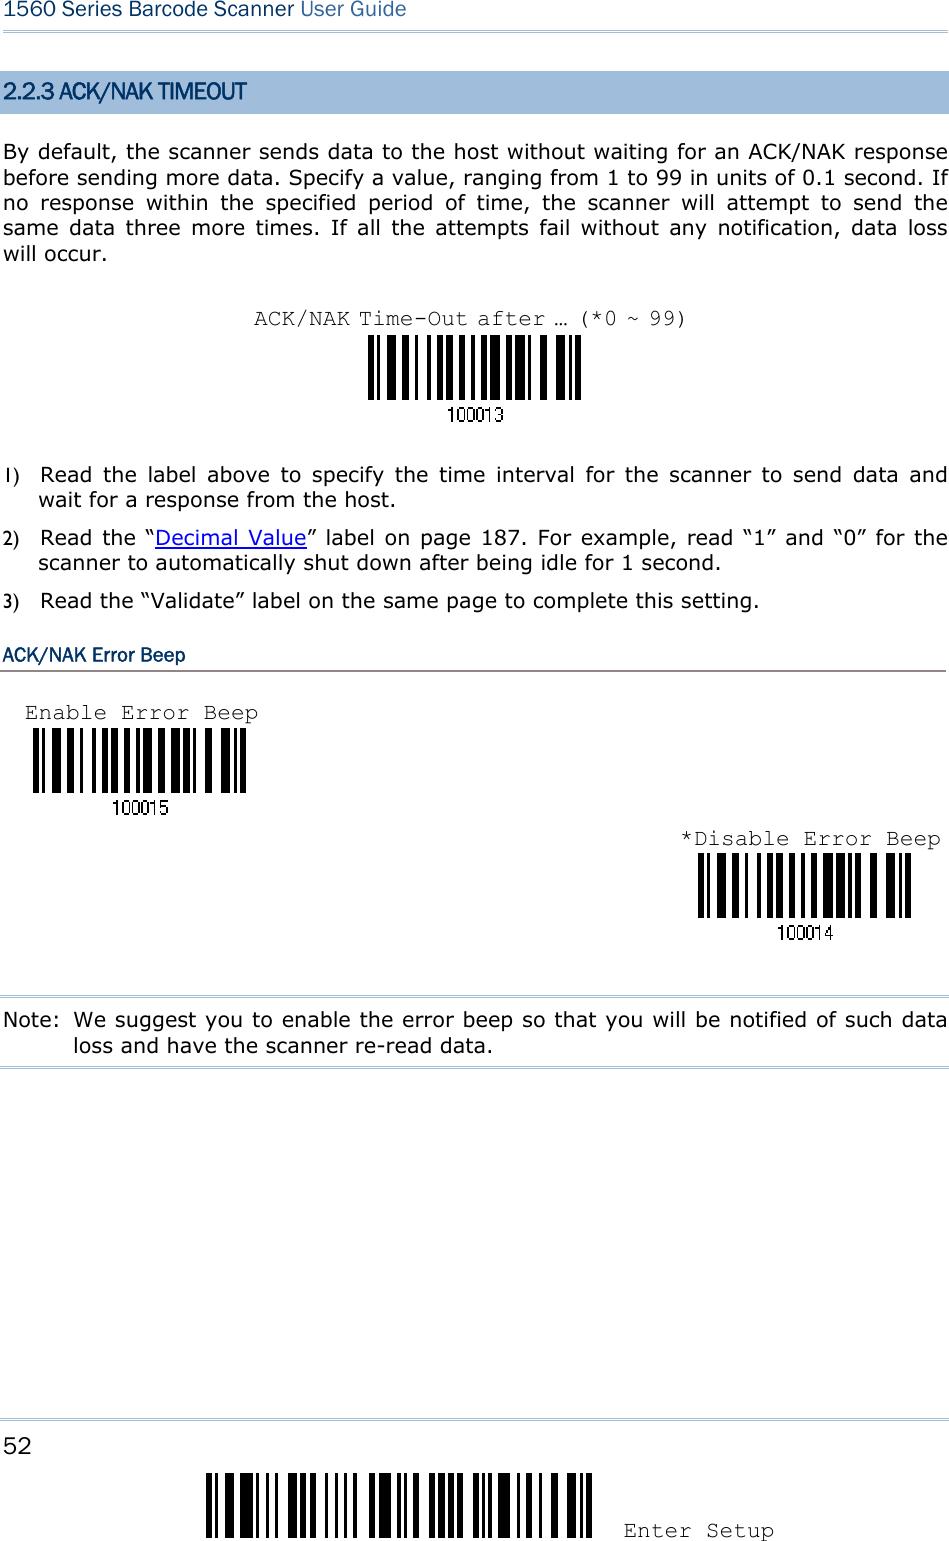 52 Enter Setup 1560 Series Barcode Scanner User Guide  2.2.3 ACK/NAK TIMEOUT By default, the scanner sends data to the host without waiting for an ACK/NAK response before sending more data. Specify a value, ranging from 1 to 99 in units of 0.1 second. If no response within the specified period of time, the scanner will attempt to send the same data three more times. If all the attempts fail without any notification, data loss will occur.    1) Read the label above to specify the time interval for the scanner to send data and wait for a response from the host.             2) Read the “Decimal Value” label on page 187. For example, read “1” and “0” for the scanner to automatically shut down after being idle for 1 second.   3) Read the “Validate” label on the same page to complete this setting. ACK/NAK Error Beep    Note:  We suggest you to enable the error beep so that you will be notified of such data loss and have the scanner re-read data.      ACK/NAK Time-Out after … (*0 ~ 99)Enable Error Beep *Disable Error Beep